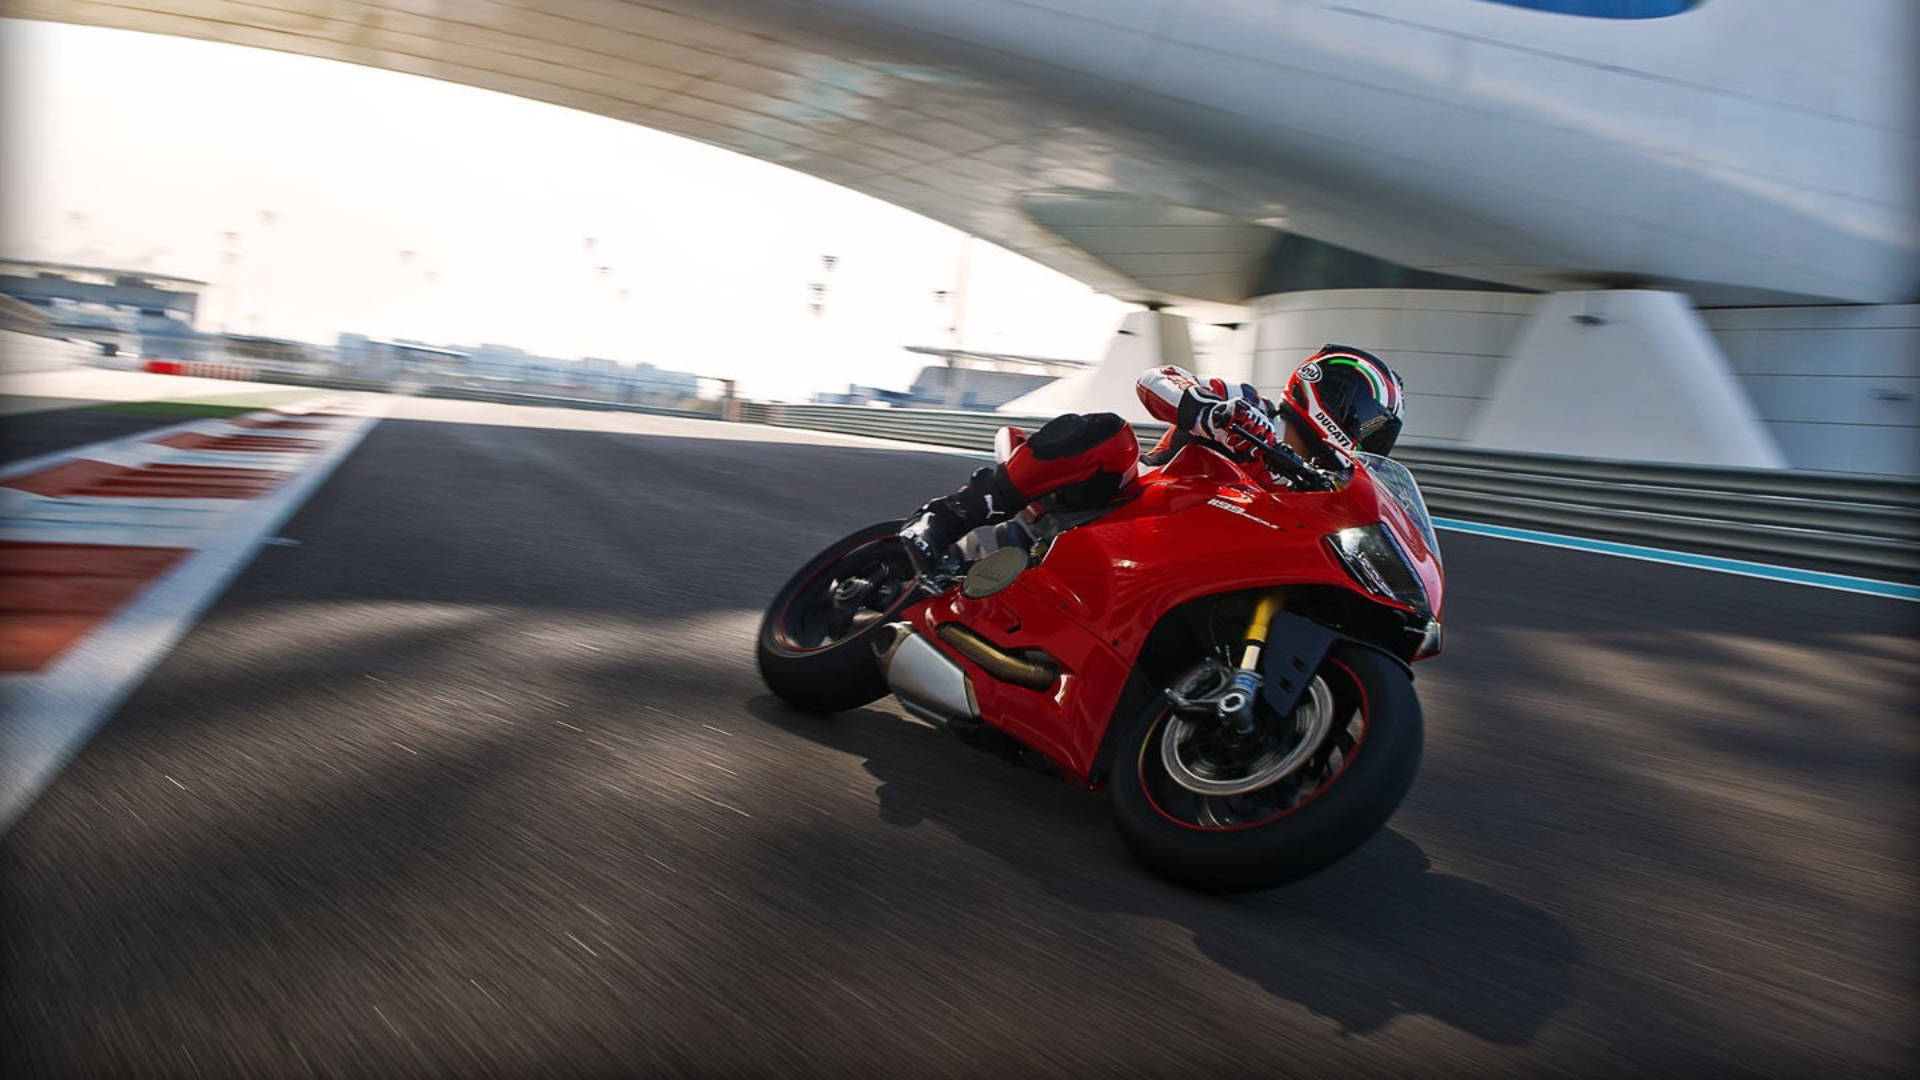 Exploring The New Victory With Ducati Motorcycles Background